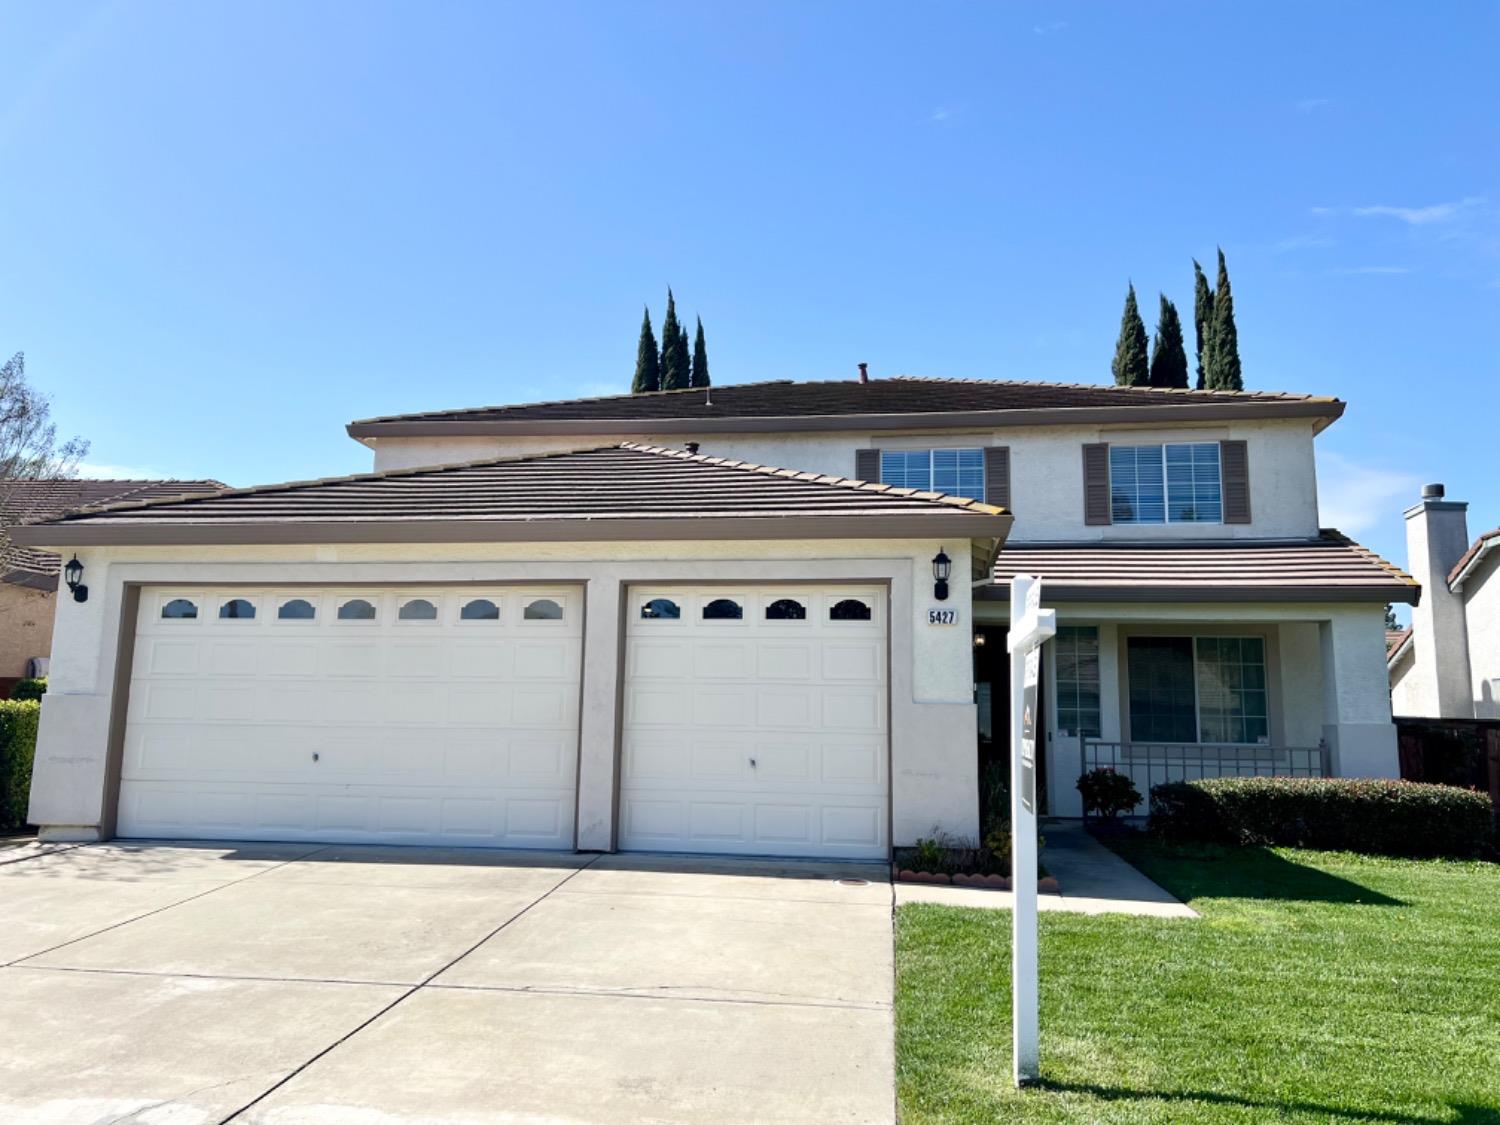 Photo of 5427 Brook Hollow Ct in Stockton, CA